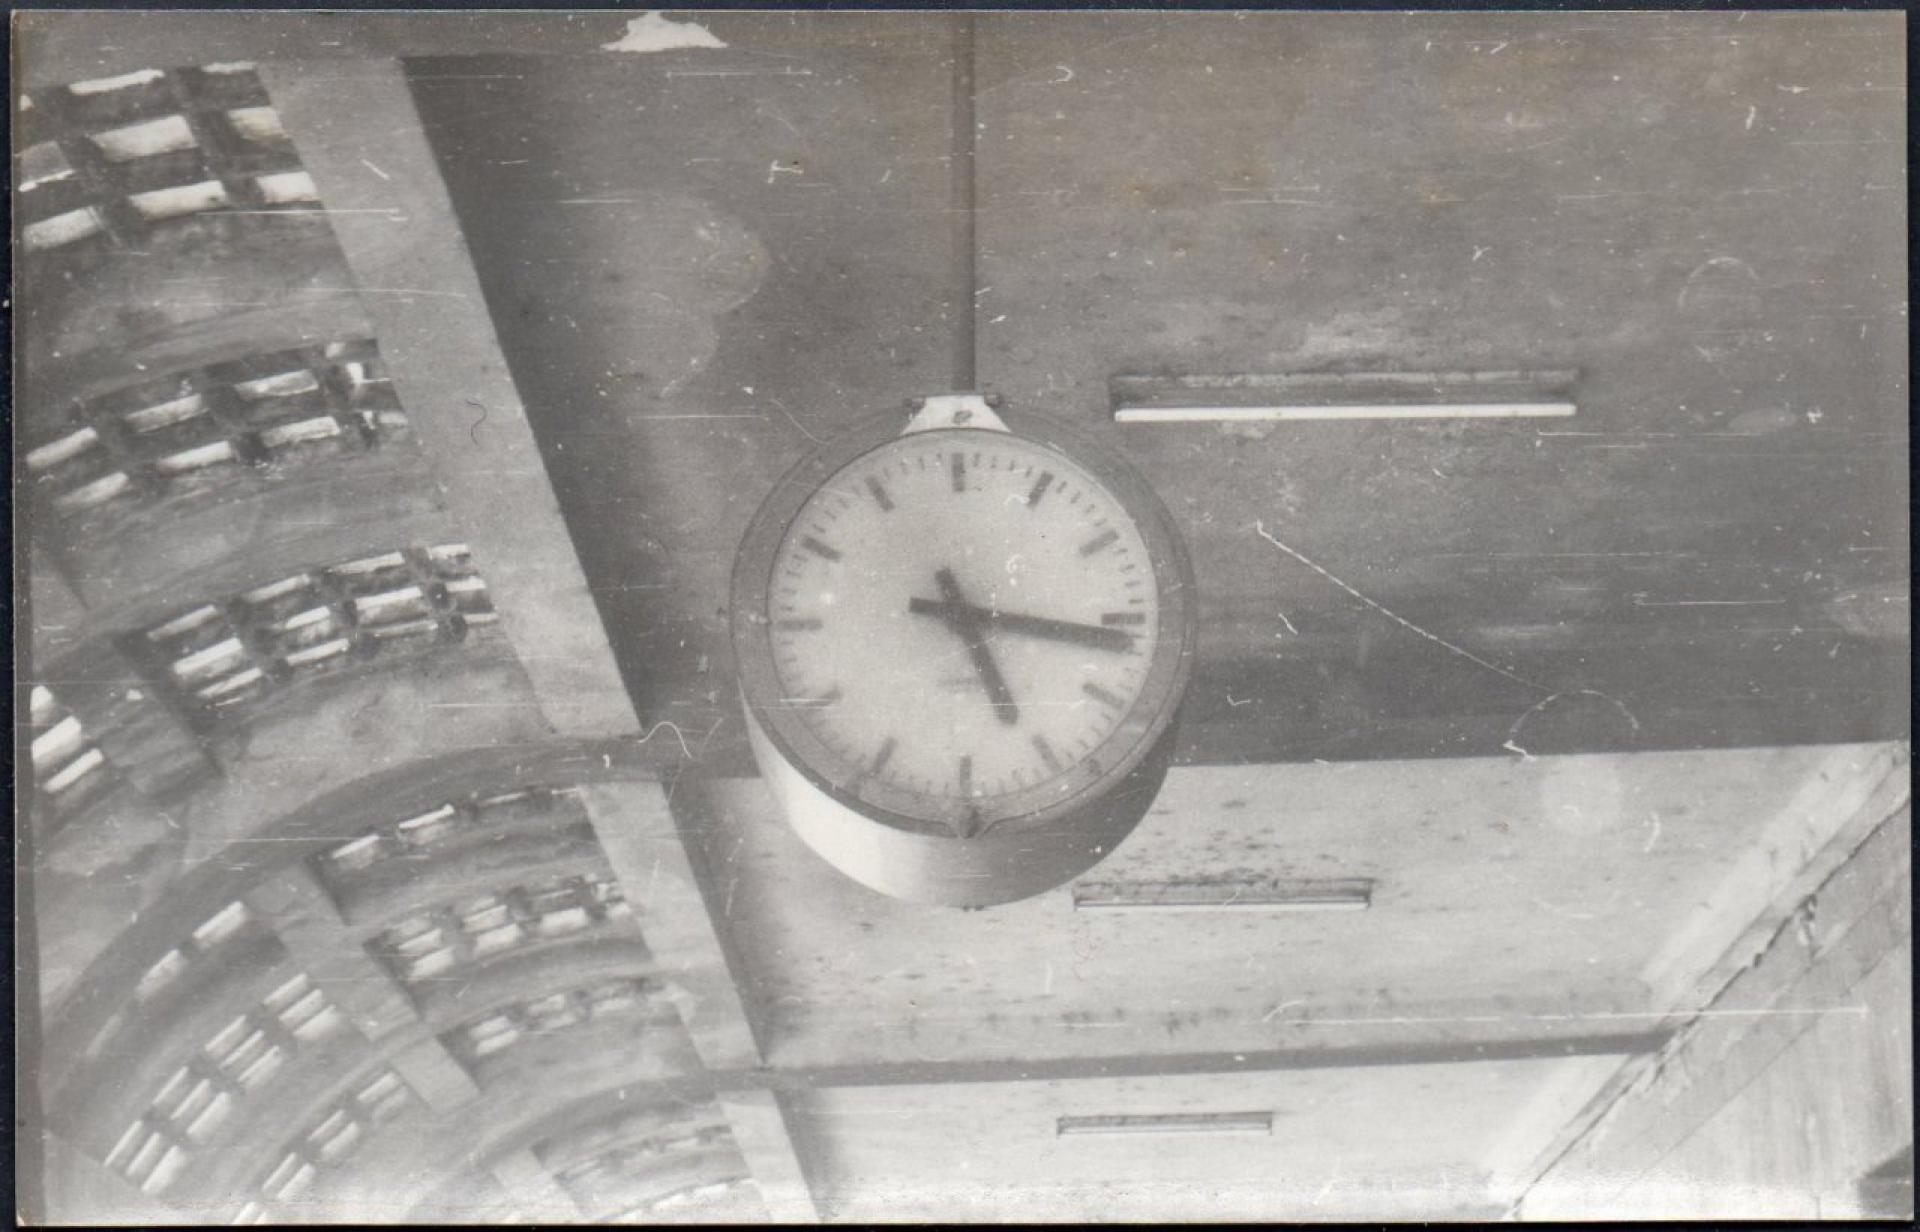 The clock at Skopje railway station stopped at 5:17am, when the first wave of the earthquake hit the city of Skopje in 1963. | Photo via Paperheritage